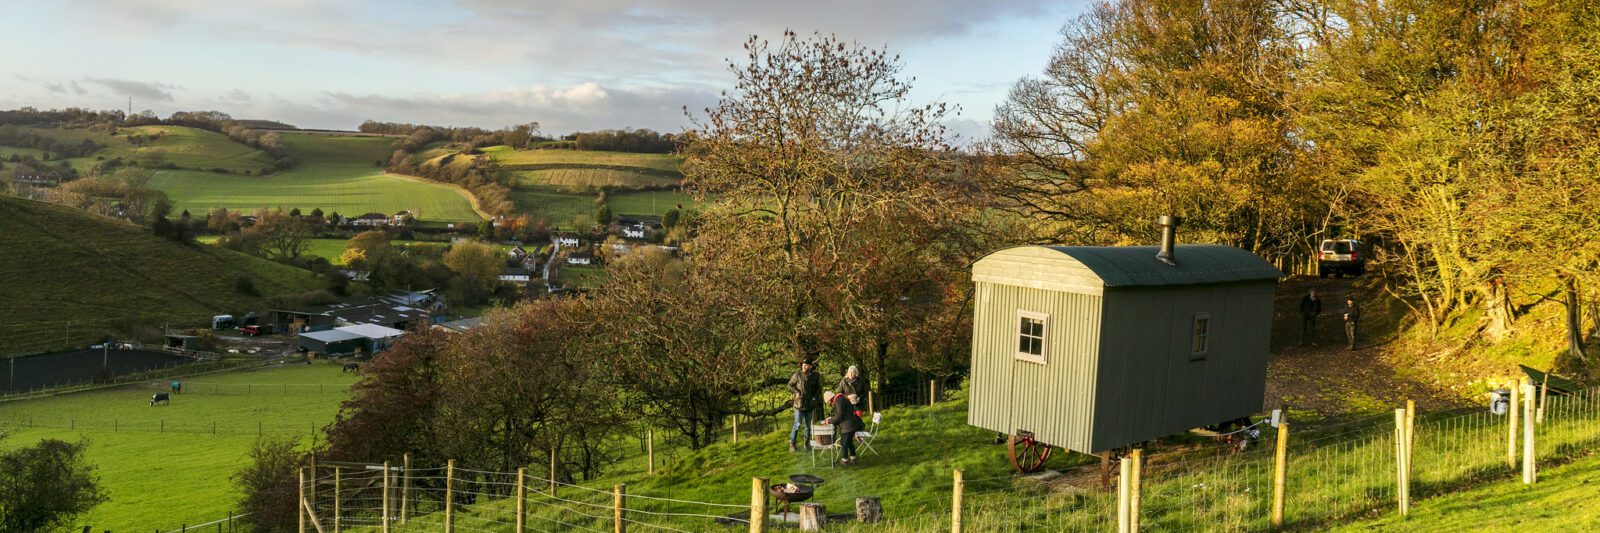 Shepherds hut and two people outside, with surrounding fields and trees.